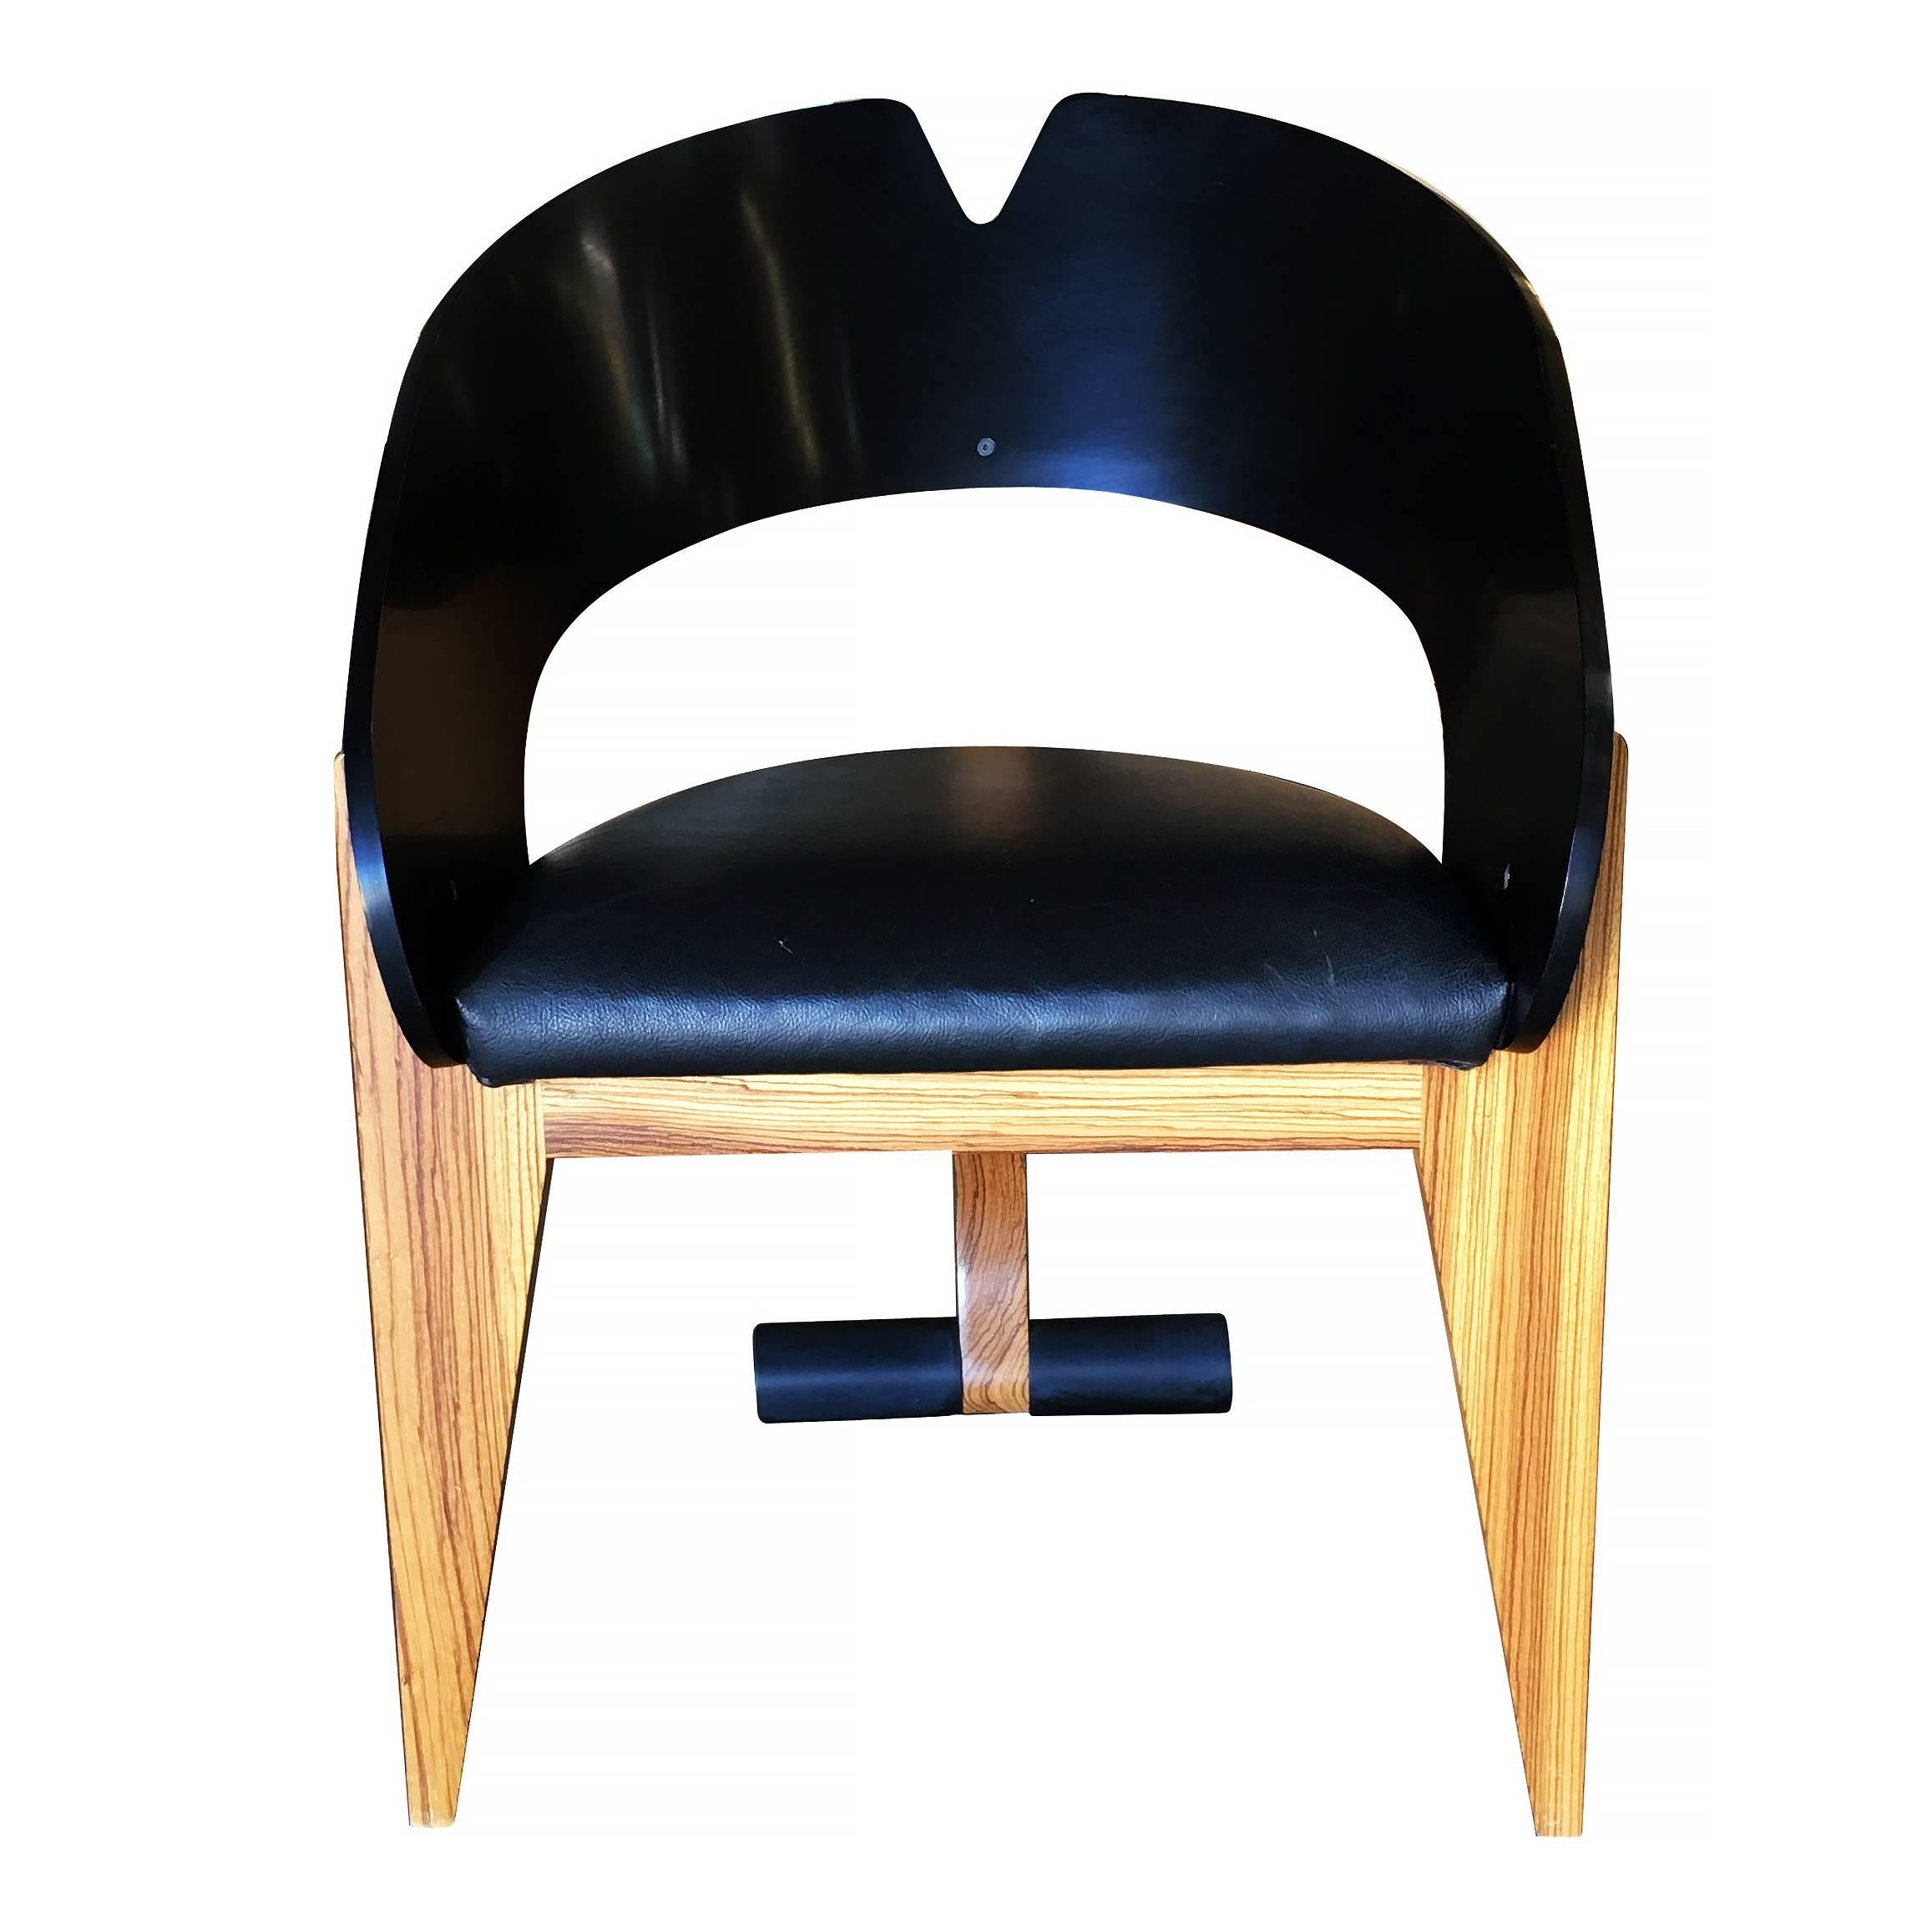 Modernist chair from the Gallery of Functional Art, circa 1990 featuring a black lacquer seat back with leather seat bottom and blonde zebrawood legs.

Available three.